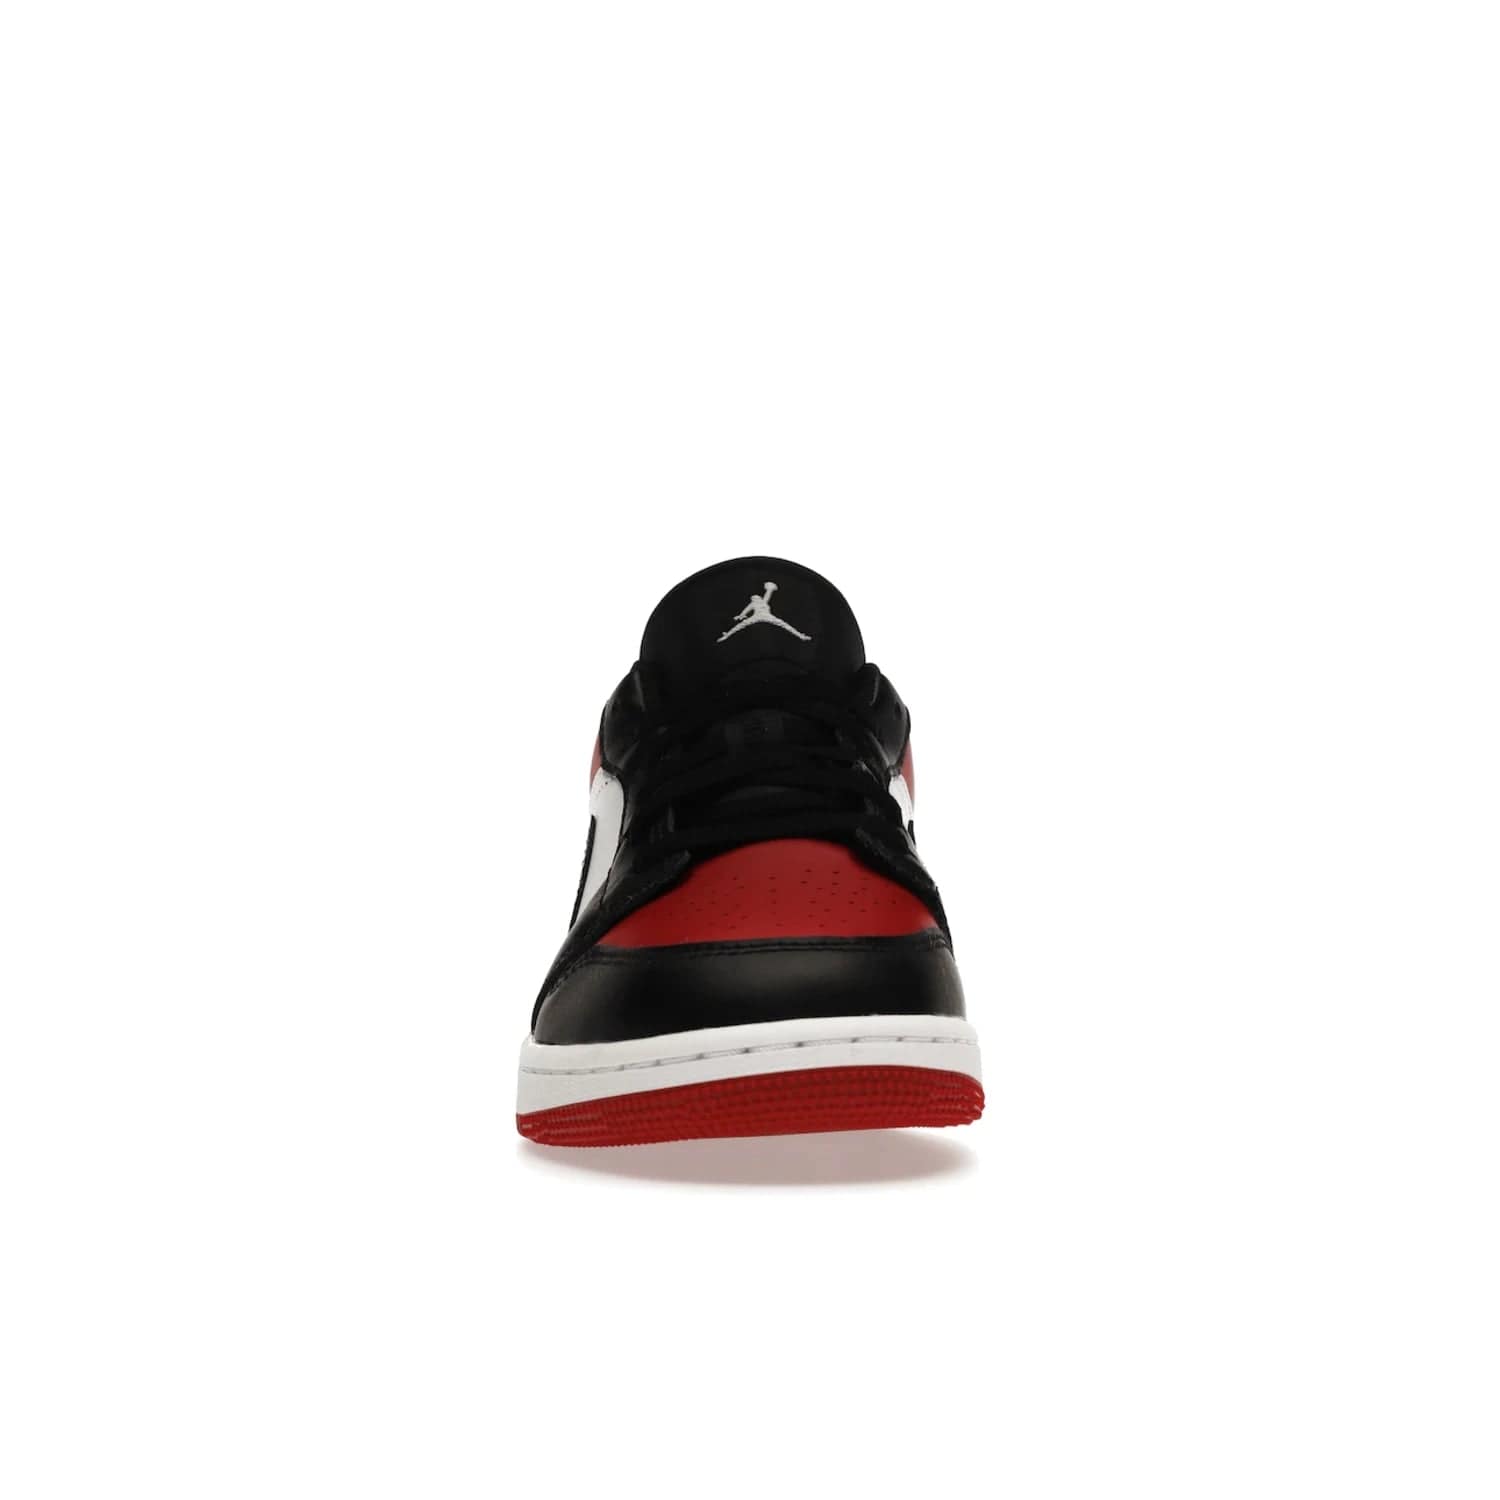 Jordan 1 Low Bred Toe (GS) - Image 10 - Only at www.BallersClubKickz.com - #
Iconic sneaker from Jordan brand with classic colorway, unique detailing & Air Jordan Wings logo. Step into the shoes of the greats with the Jordan 1 Low Bred Toe GS!